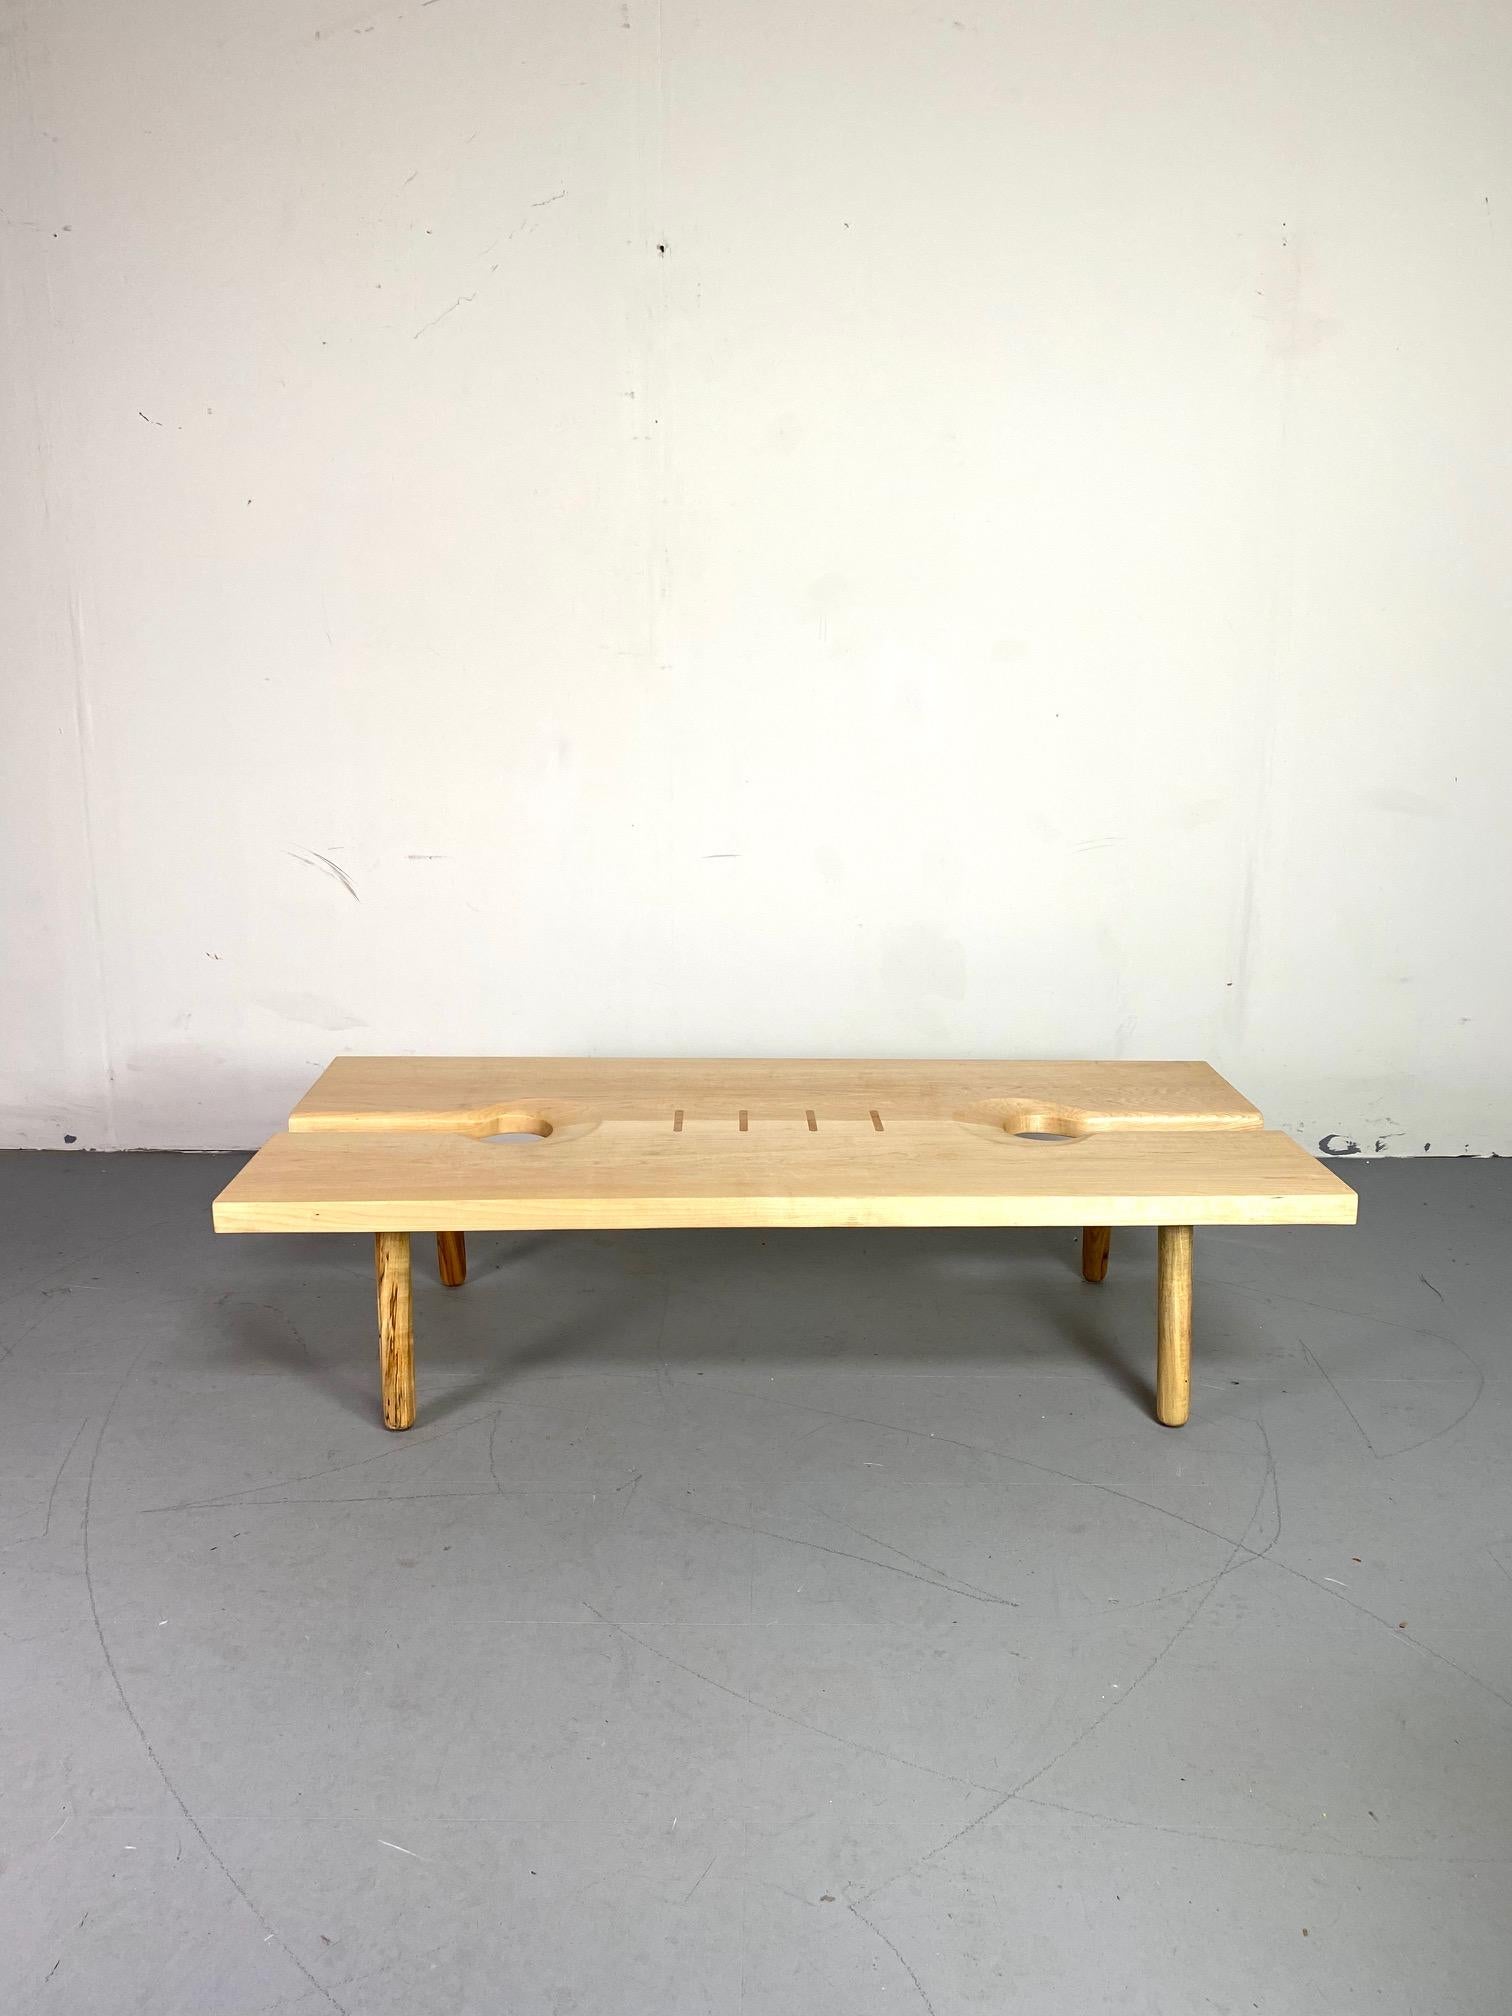 Studio Coffee Table by Michael Rozell US, 2020 For Sale 8